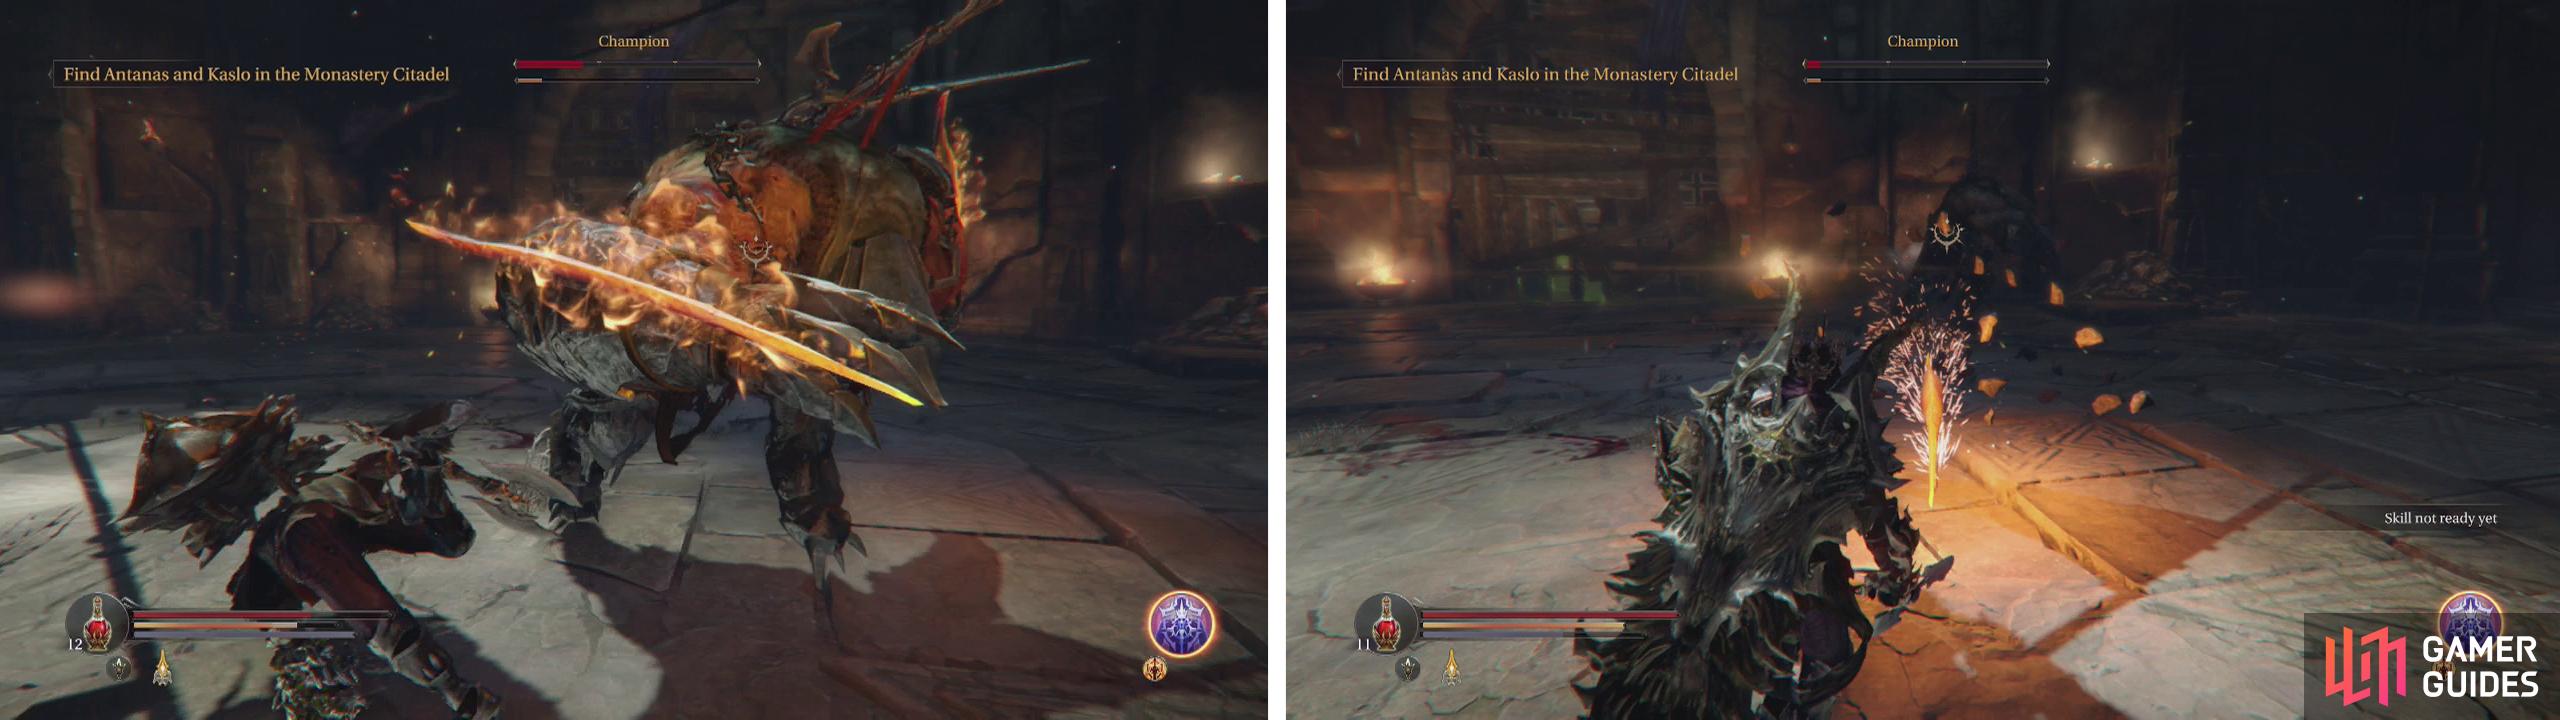 When the boss enters Rage Mode his weapons will catch alight (left). At the end of the fight, his subterranean attack will change into a spinning blade (right).